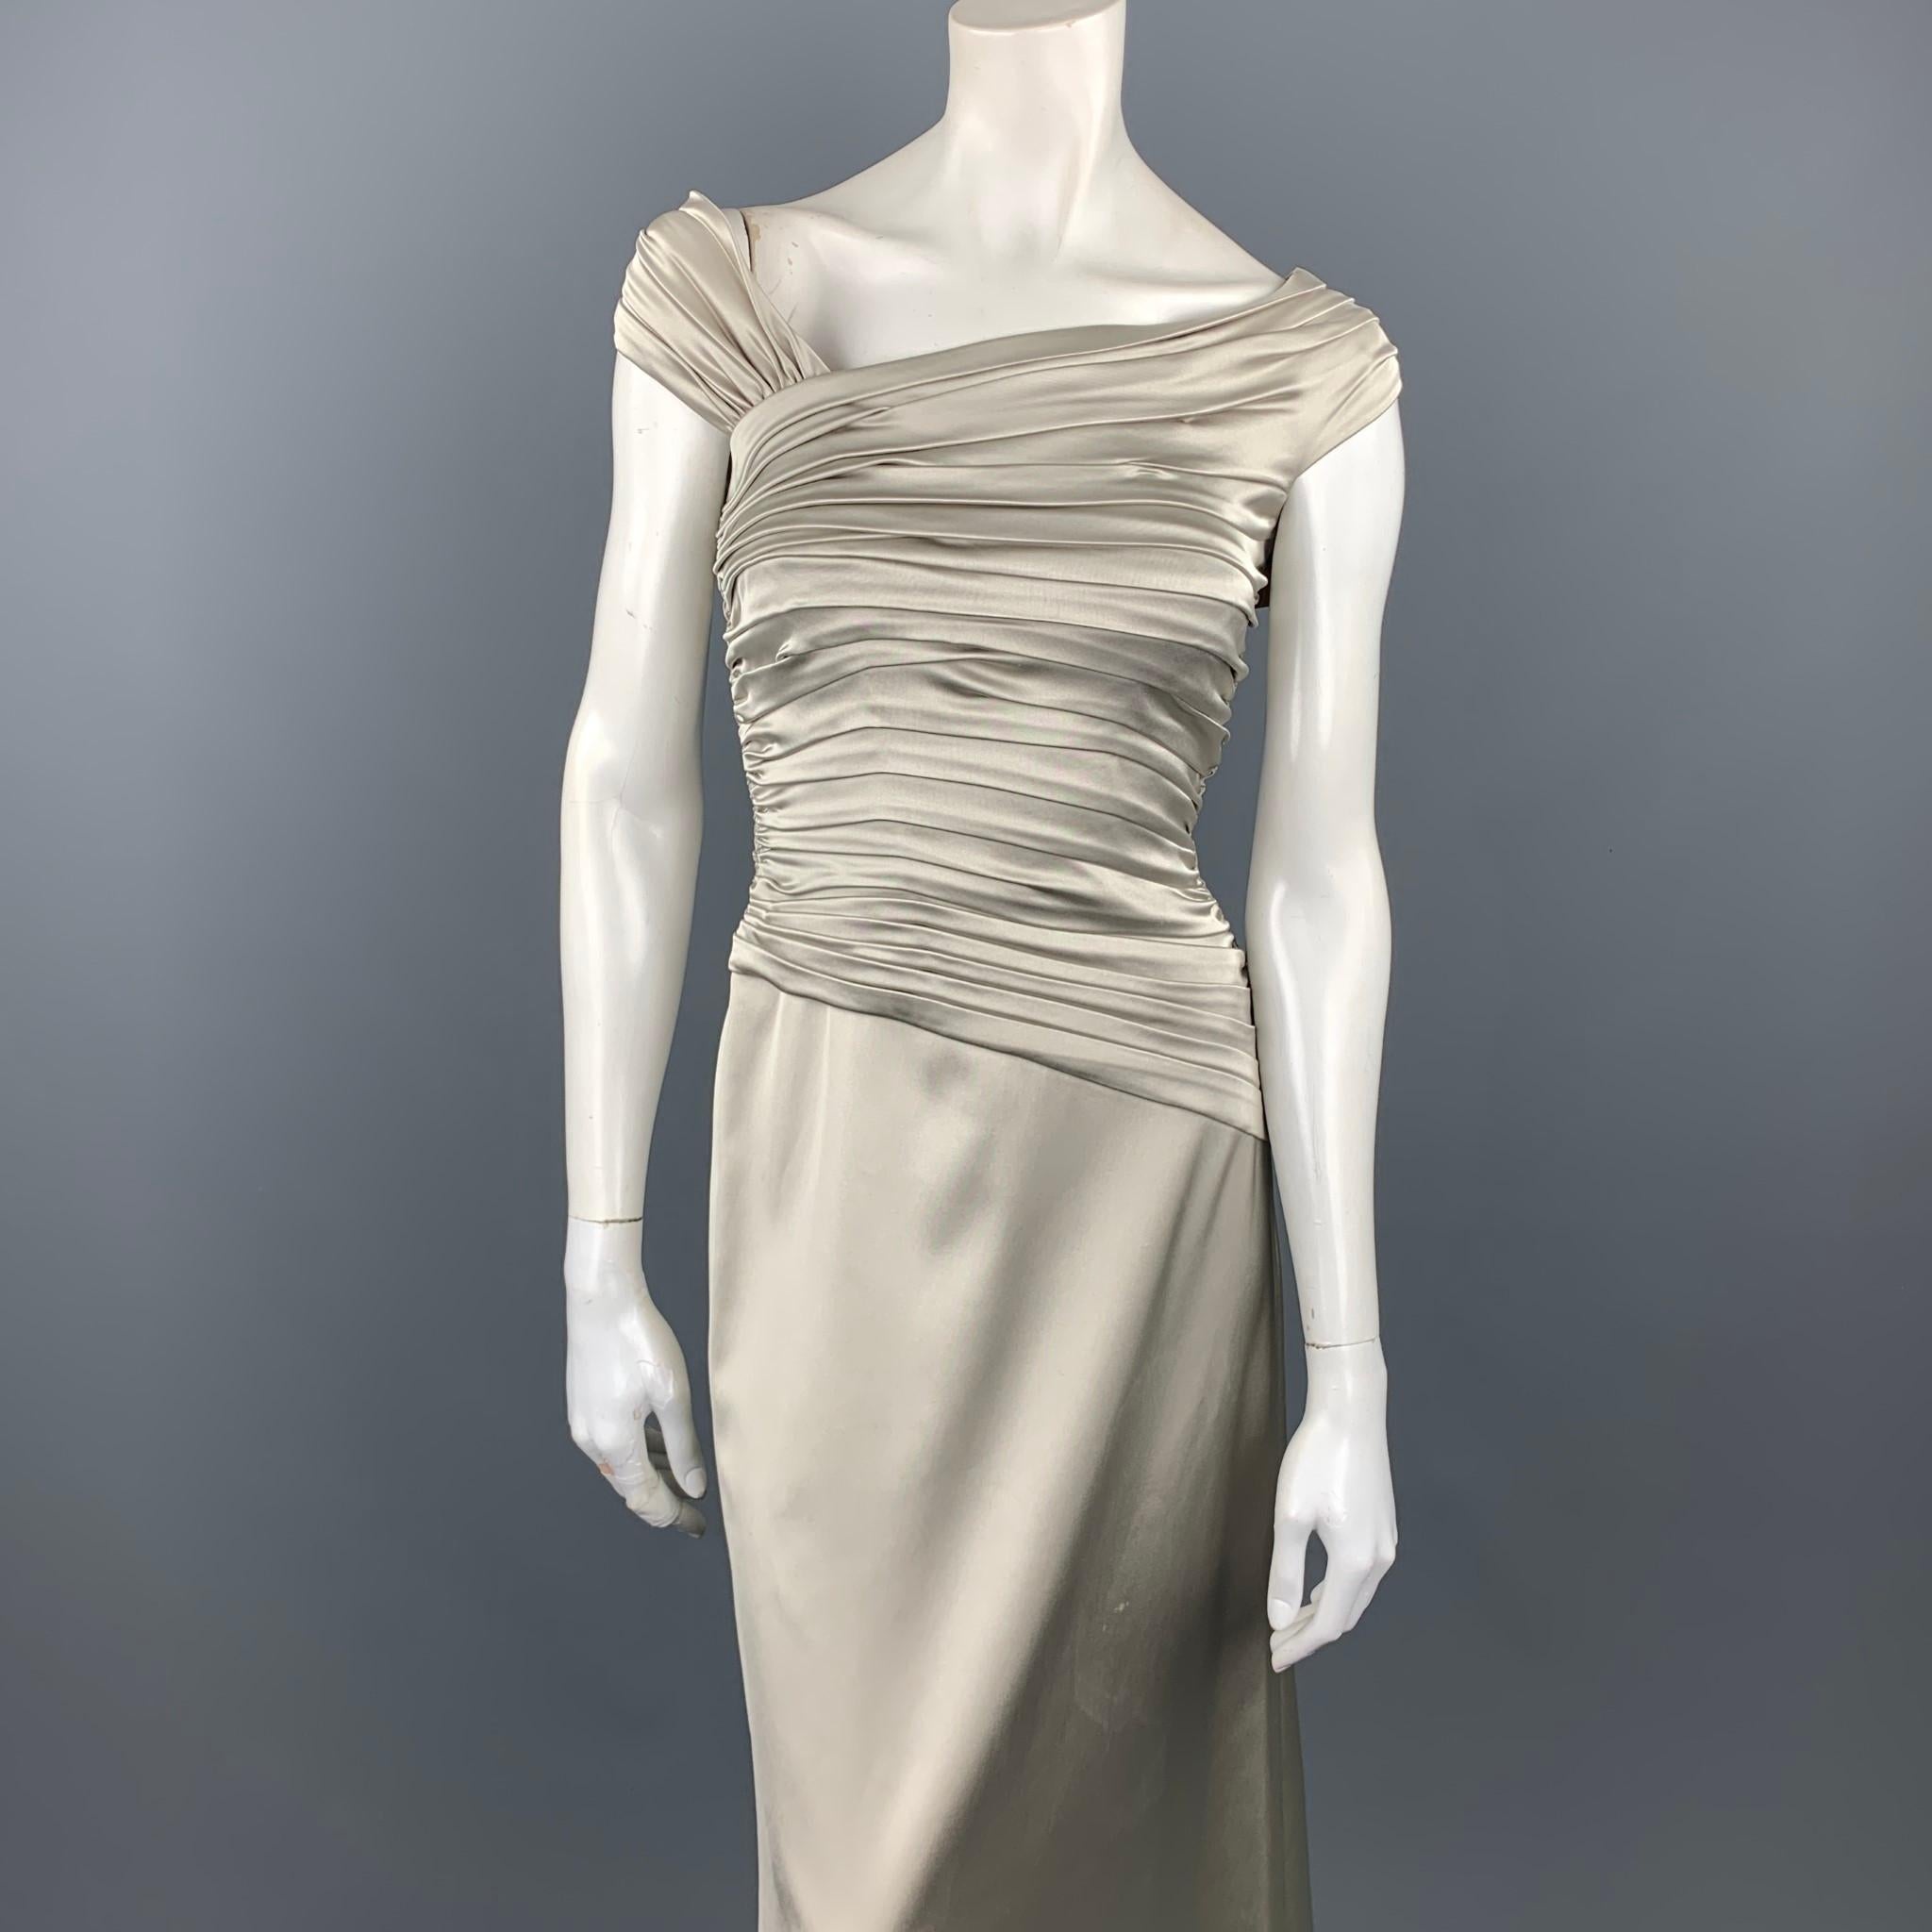 TADASHI evening gown comes in a silver satin acetate blend featuring a ruched bodice style, sleeveless, and a back zip up closure. Minor wear & discoloration throughout. As-Is. Made in USA.

Fair Pre-Owned Condition.
Marked: UK